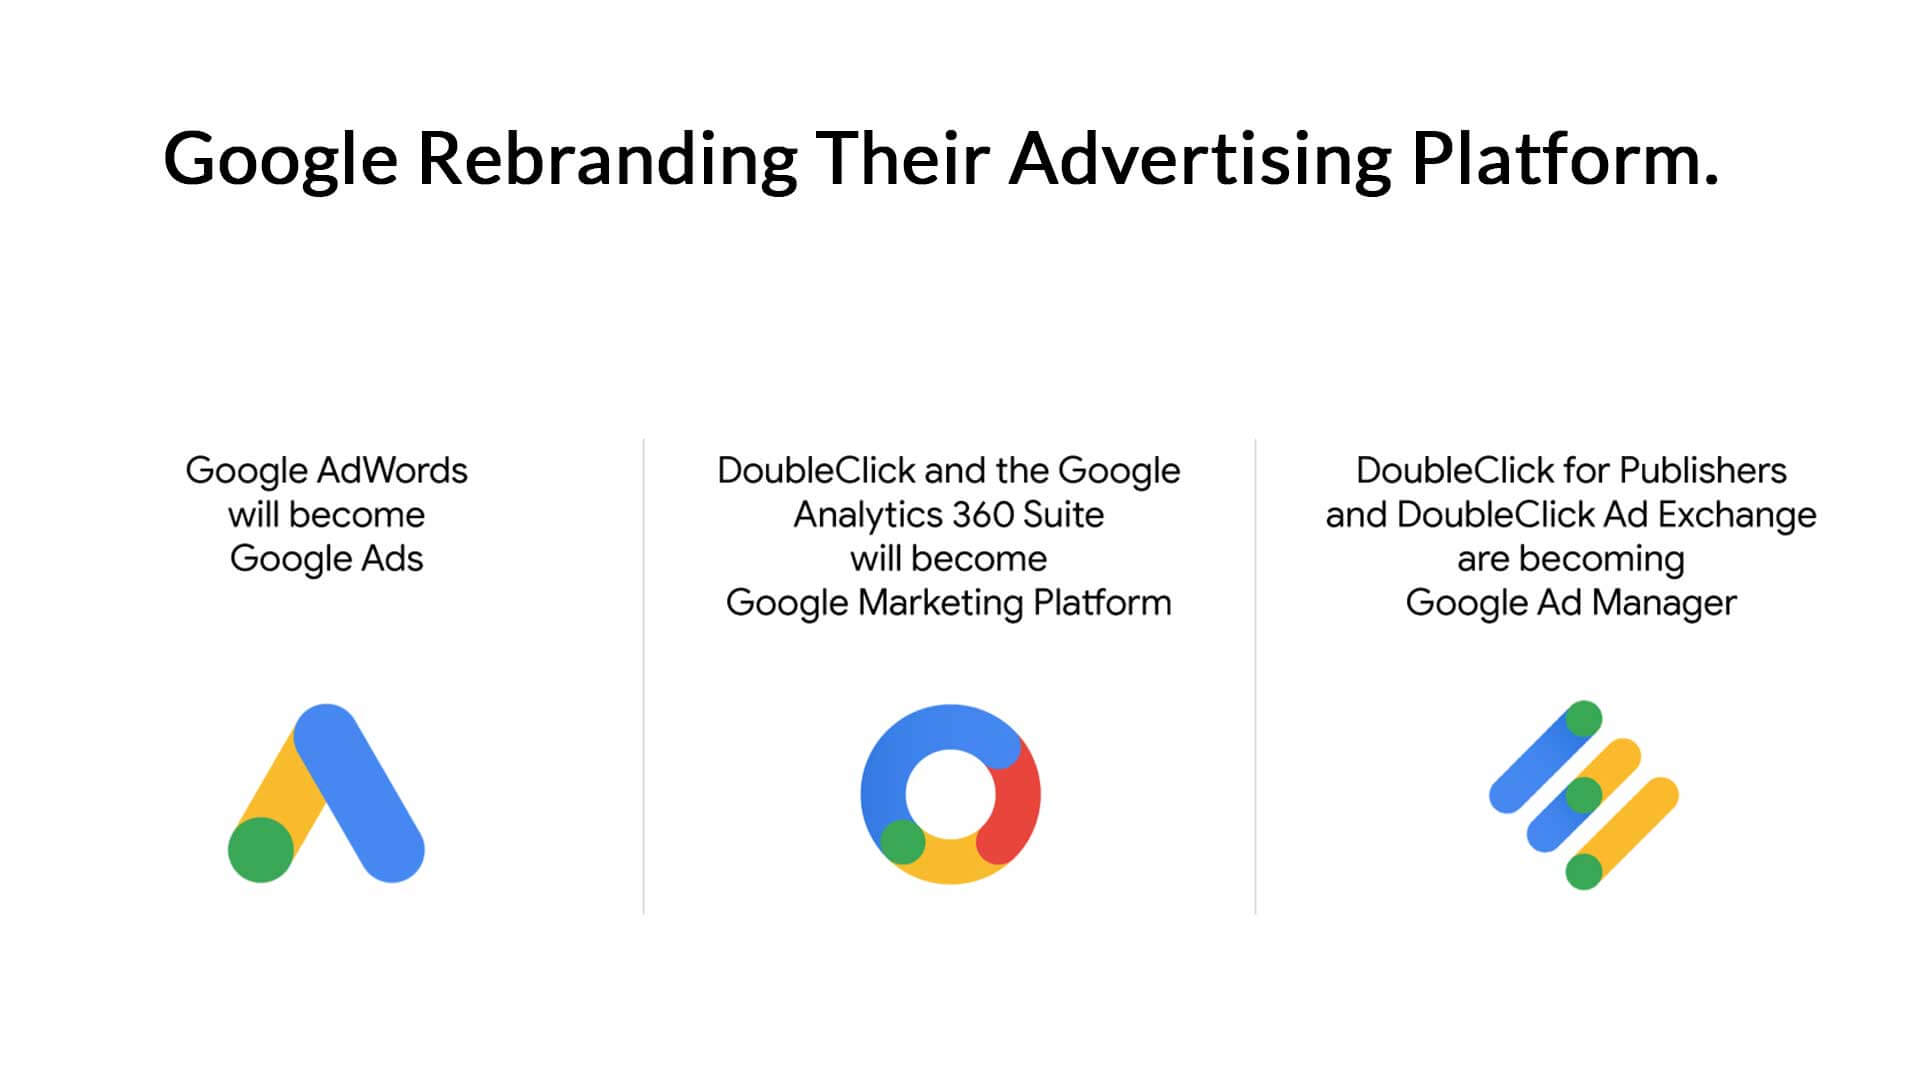 Google rebrands its ad lineup, with AdWords becoming Google Ads